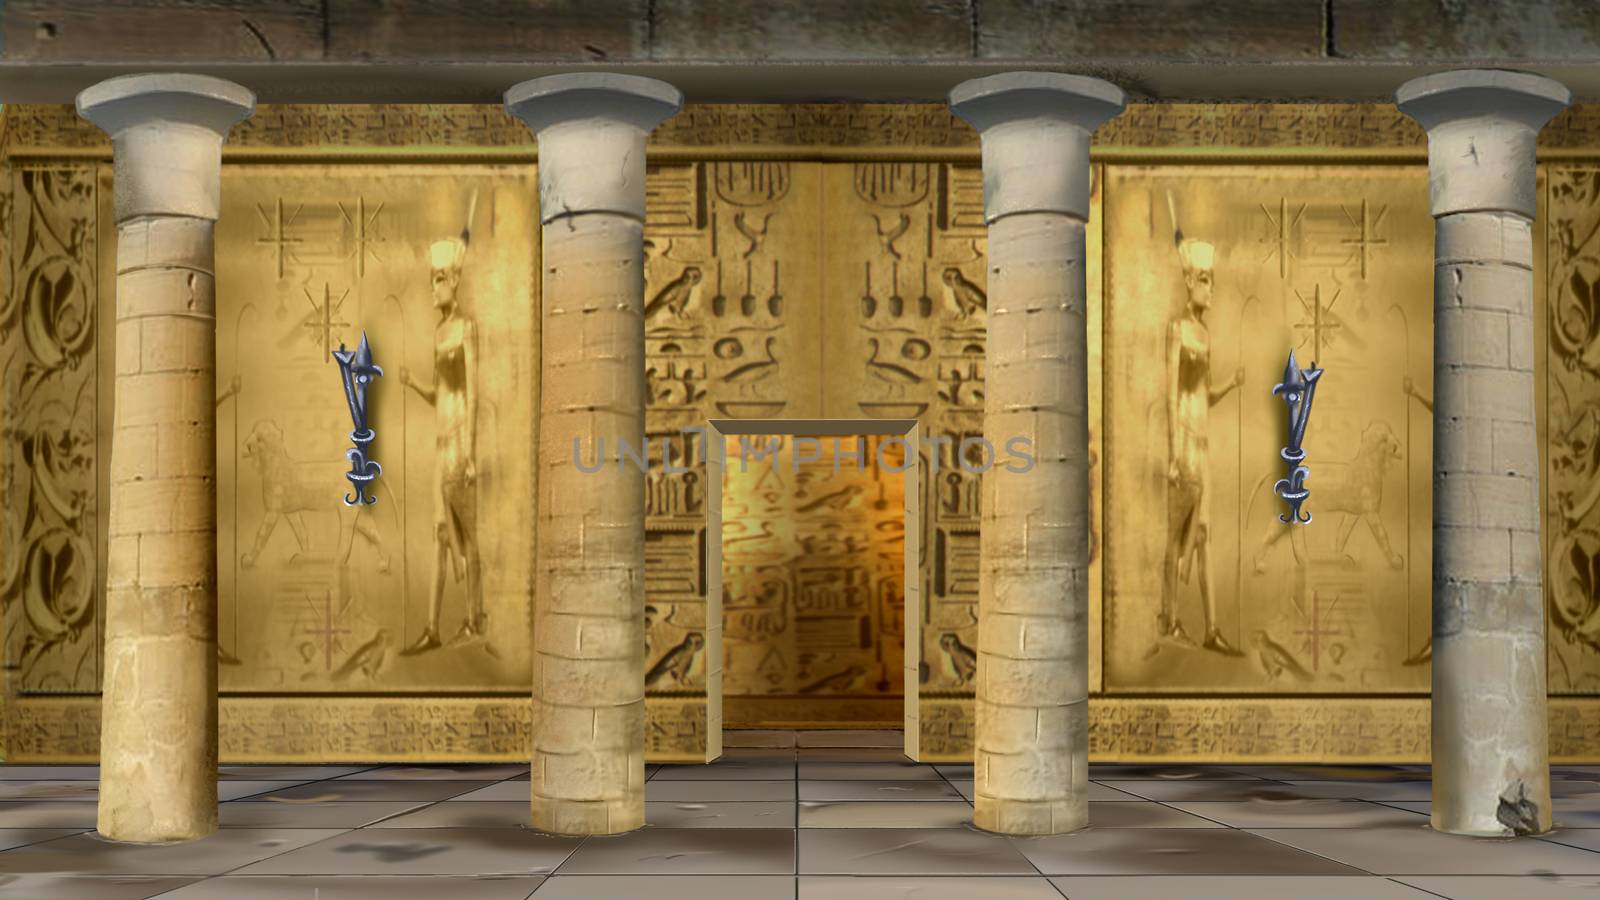 Digital painting of the hall of Ancient Egyptian Temple with columns and mural.